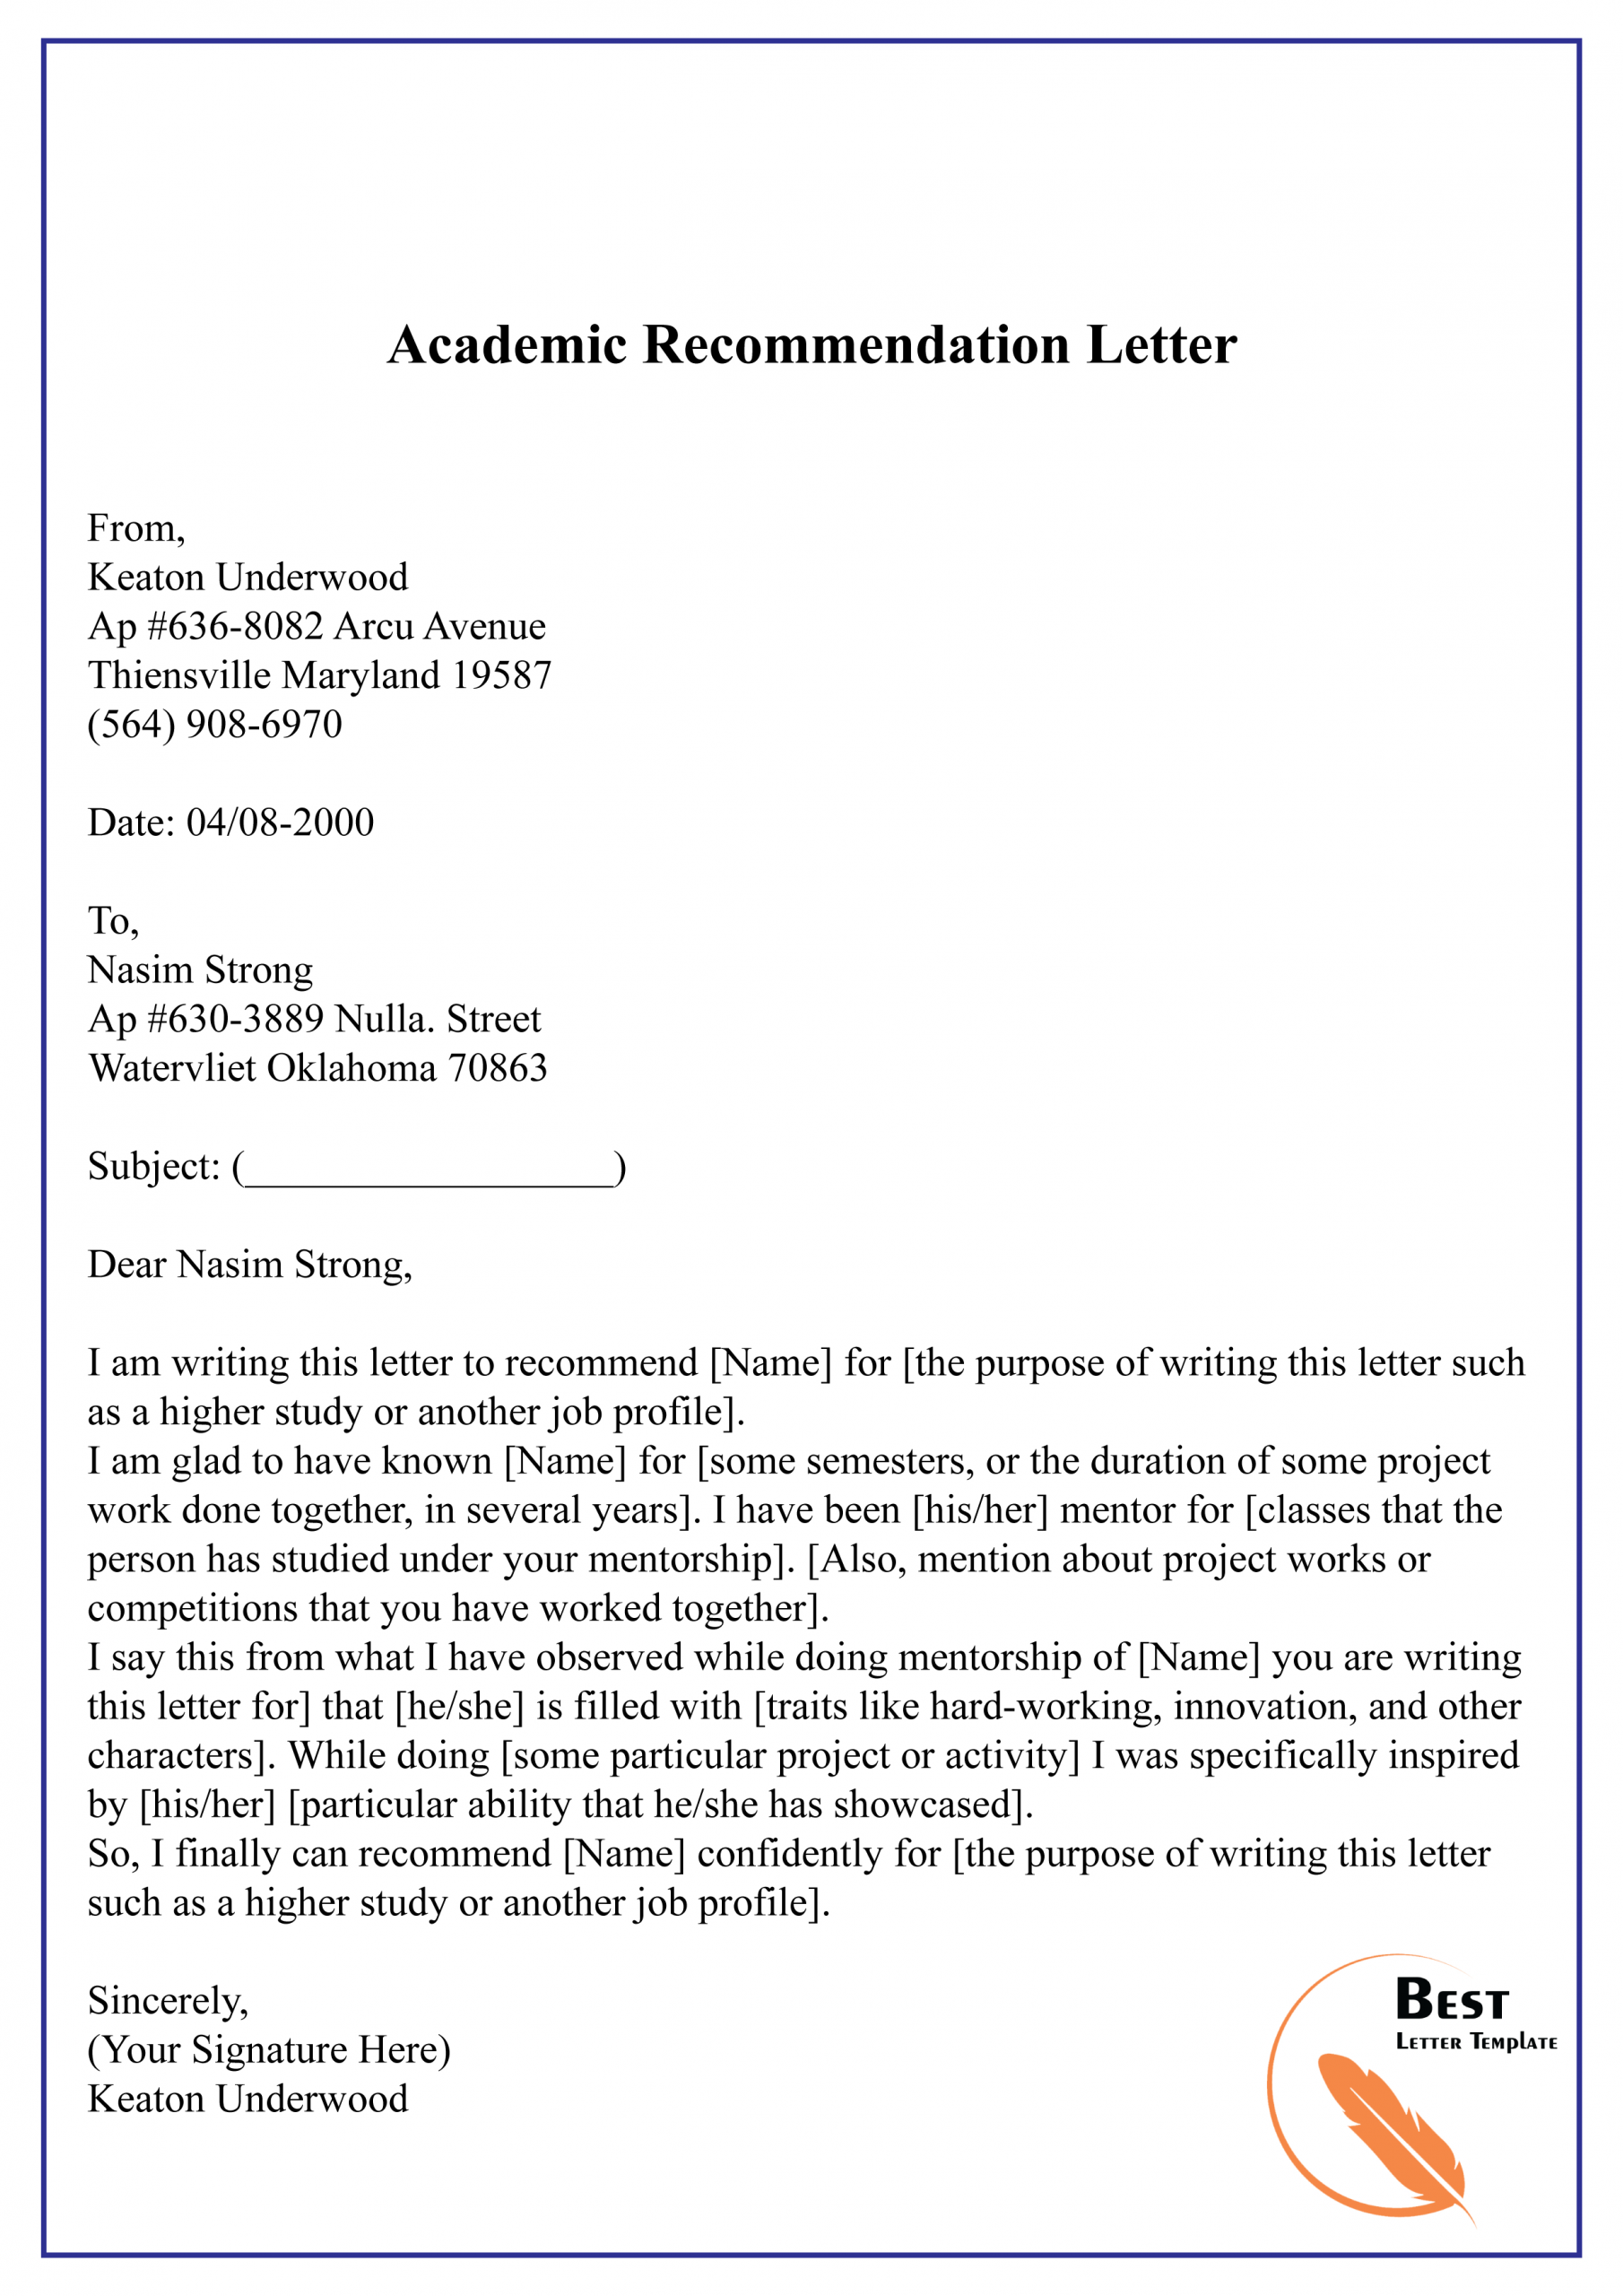 Academic Recommendation Letter 01 Best Letter Template within dimensions 2480 X 3508